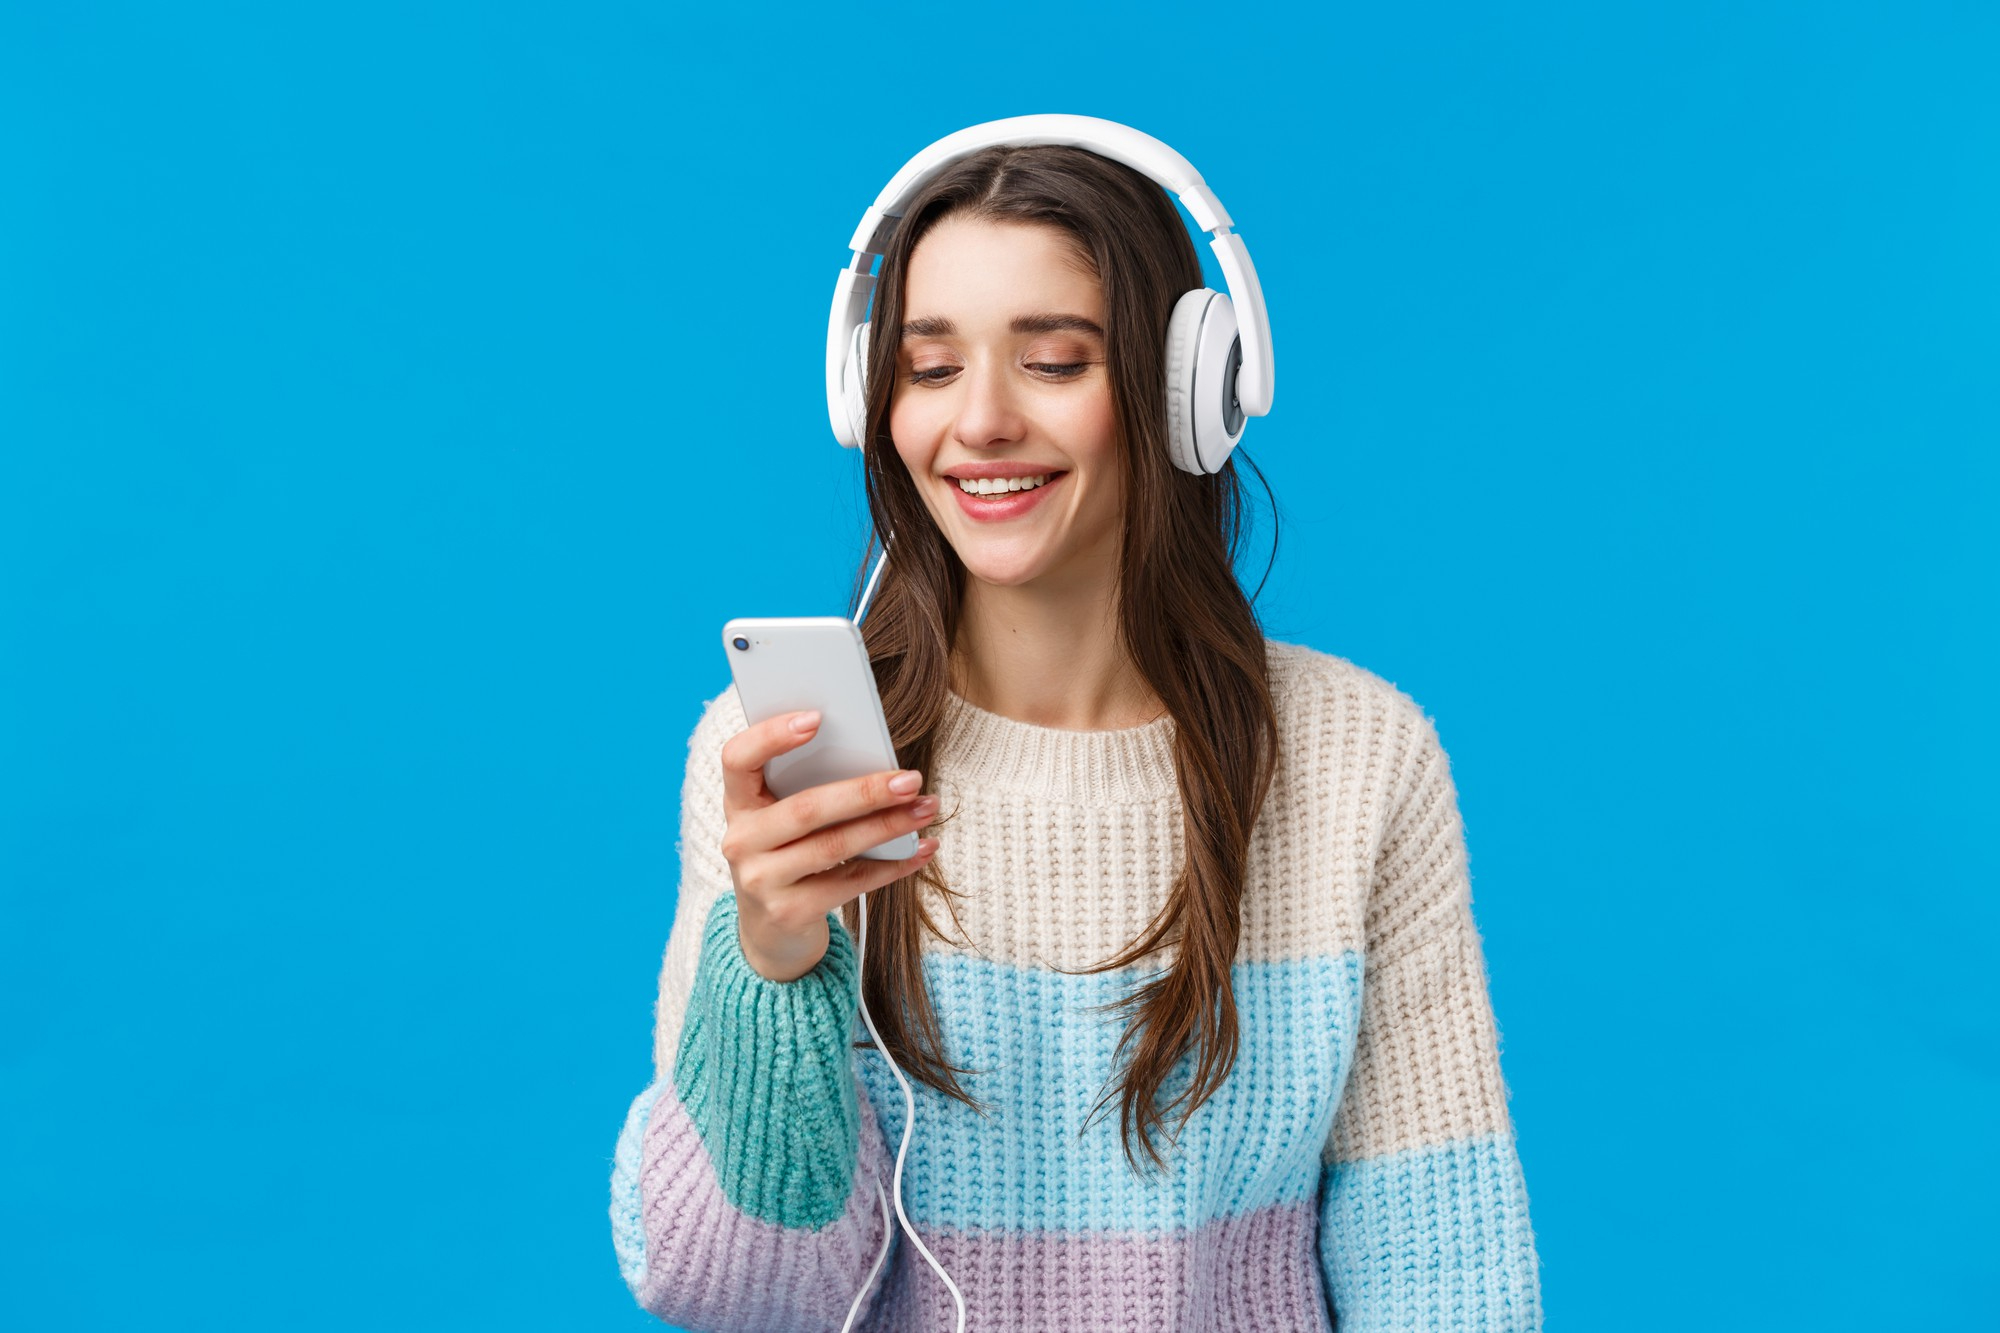 young millennial woman with headphones using streaming music app on cellphone blue background